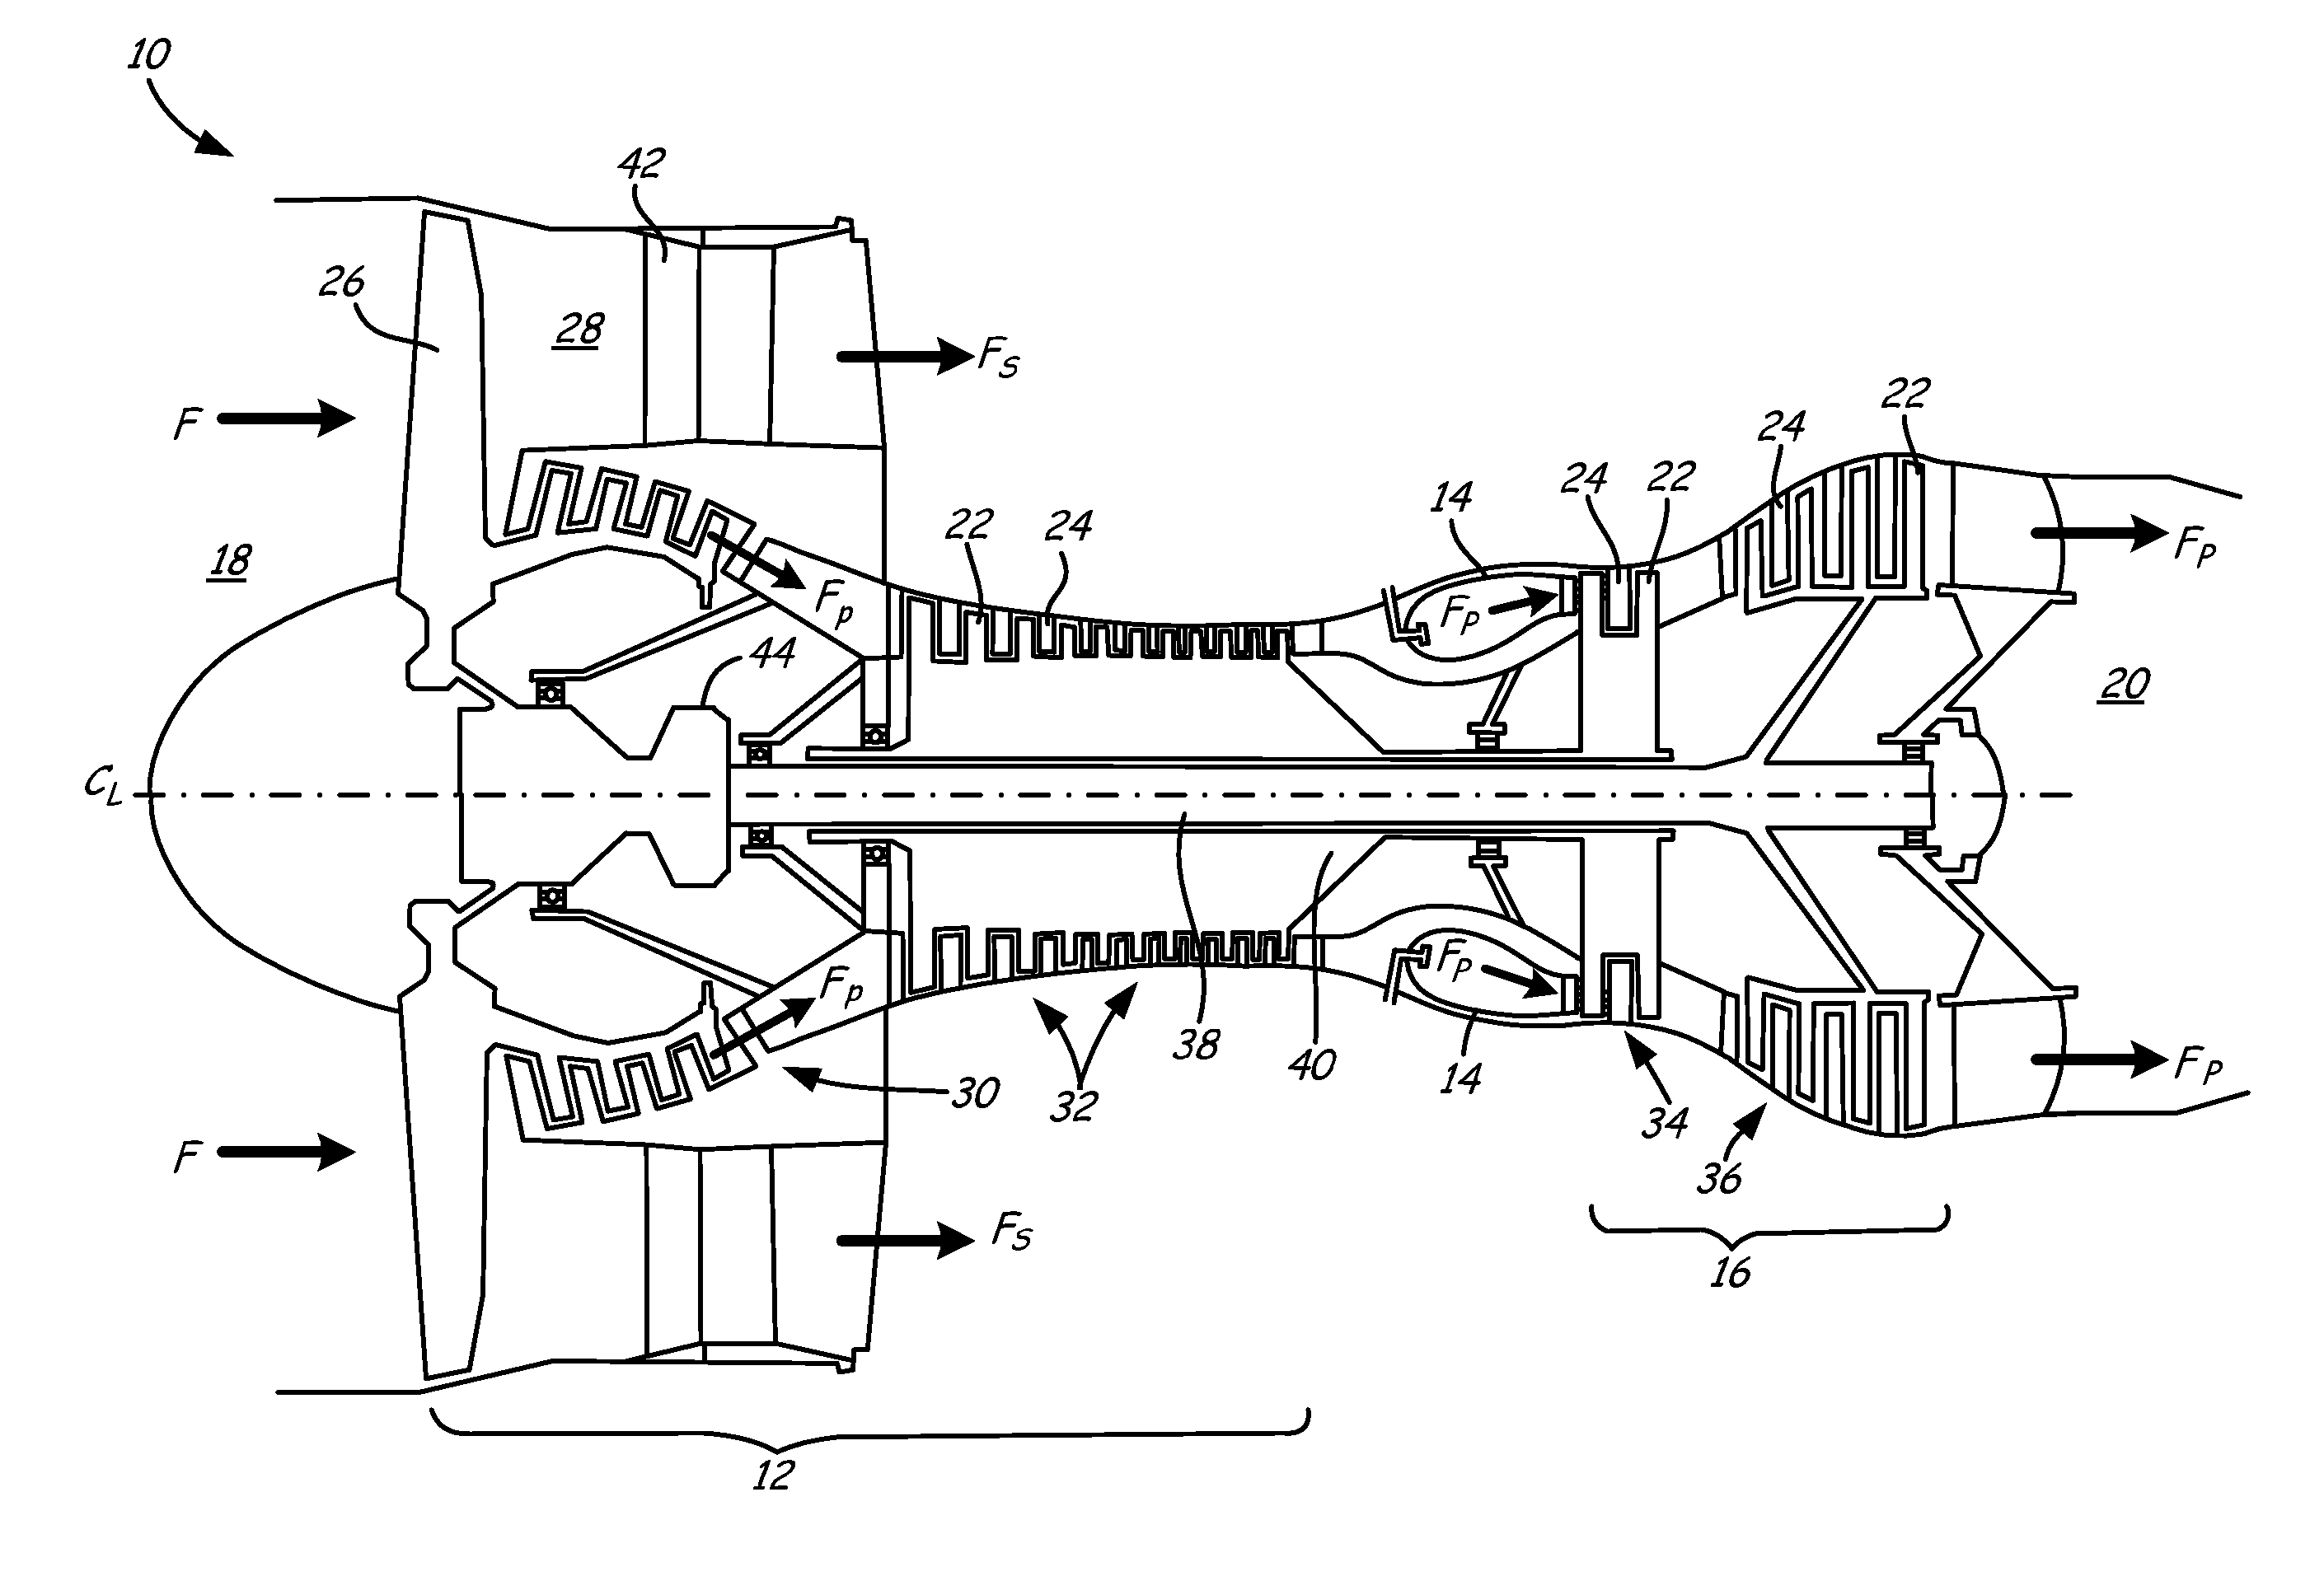 Turbomachinery component cooling scheme